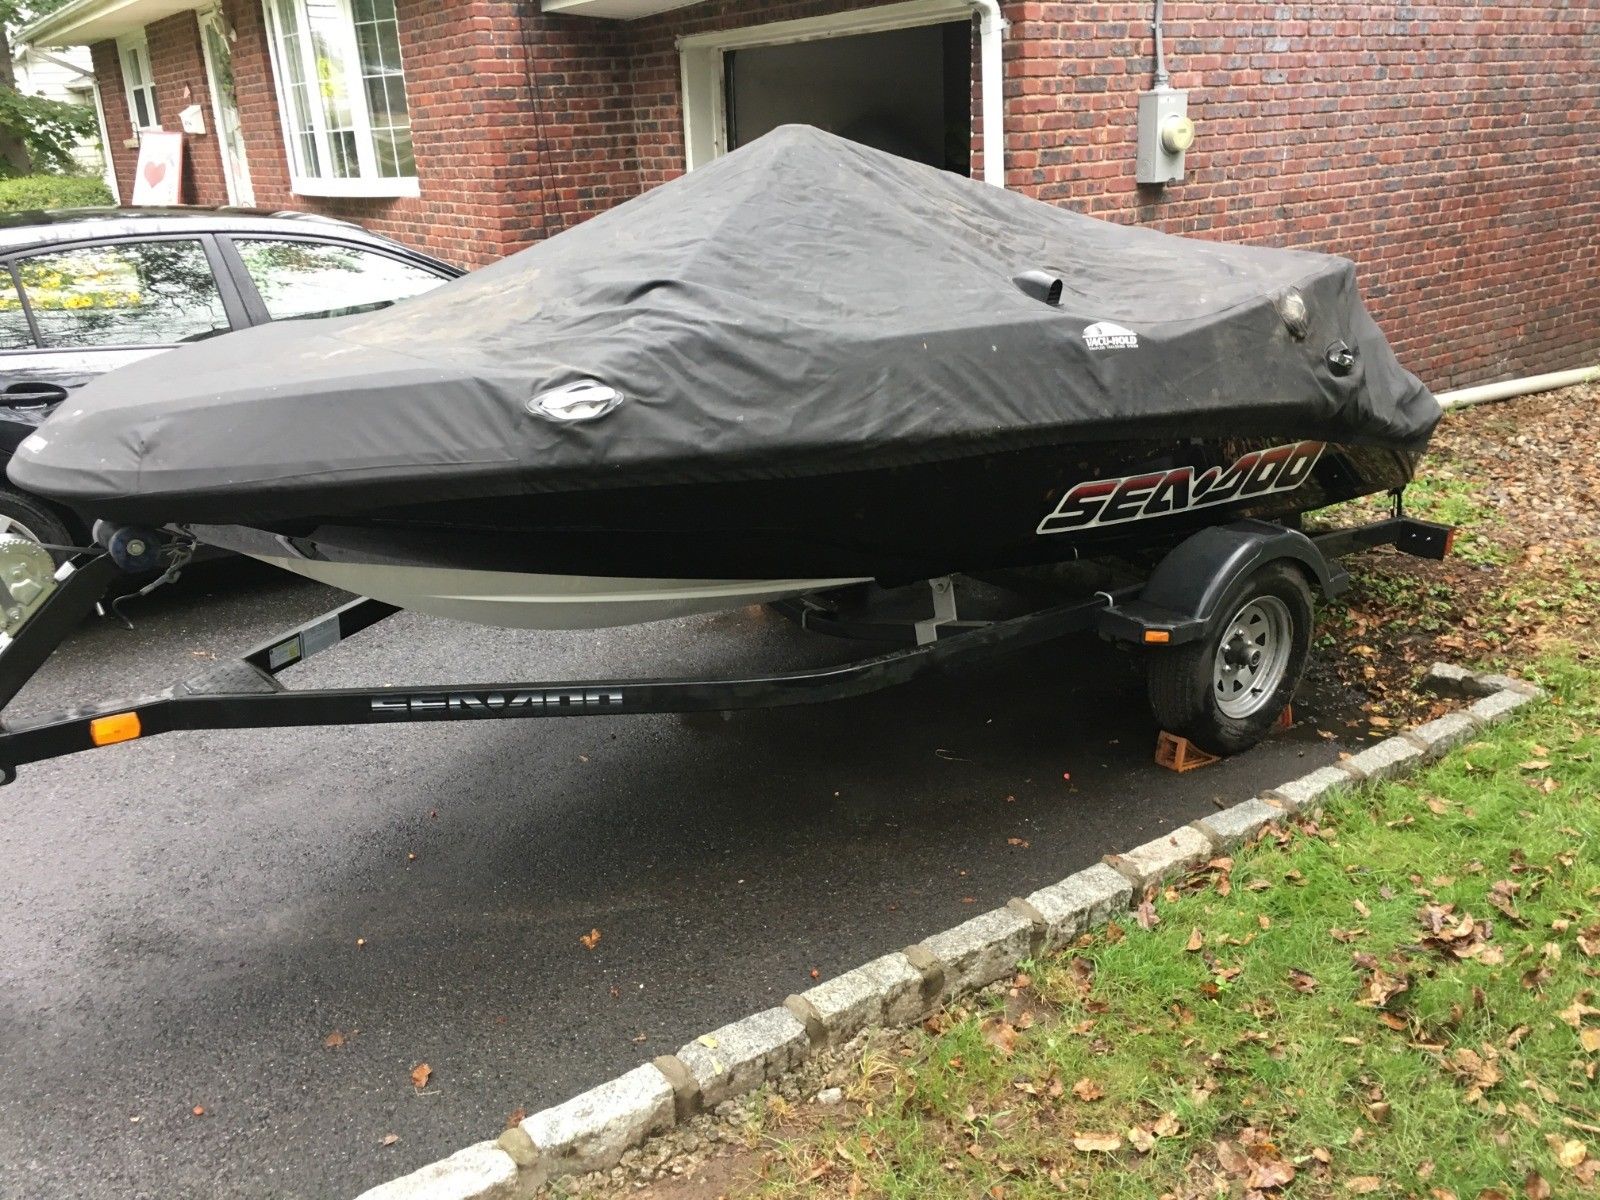 Sea Doo 2009 for sale for $10,999 - Boats-from-USA.com